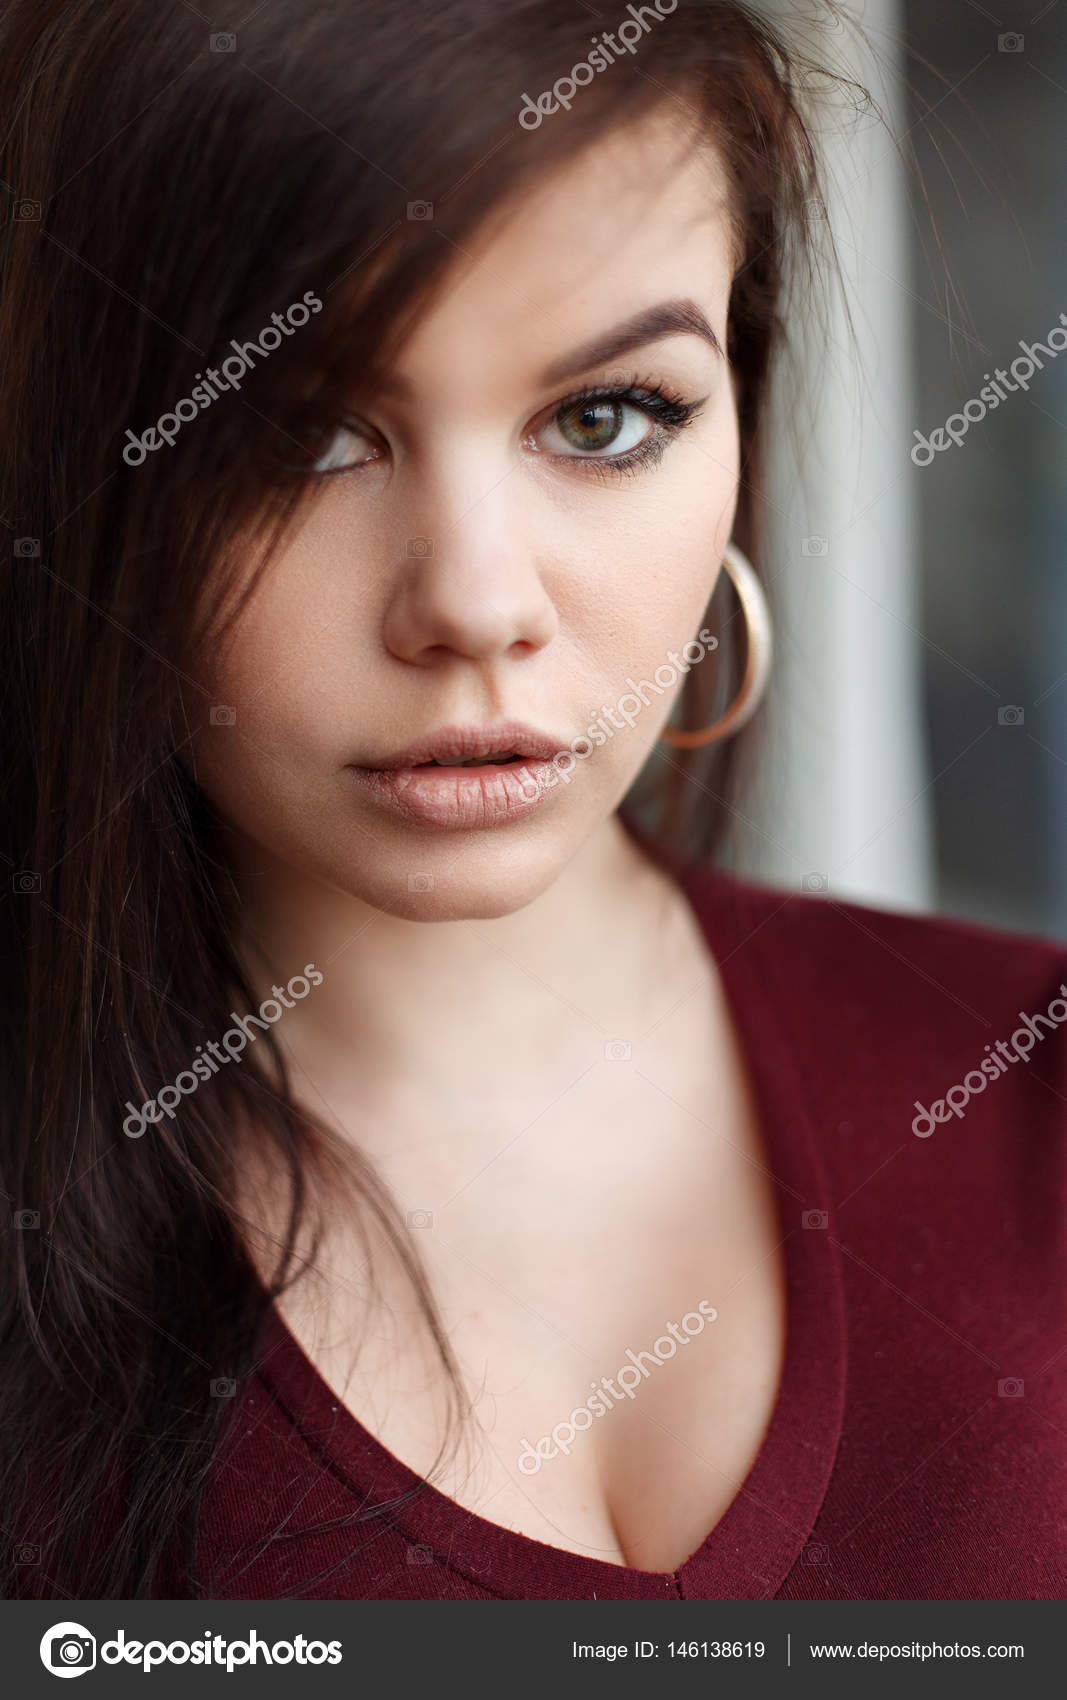 Close Up Fashion Portrait Of Seductive Sexy Woman With Big Blue Eyes